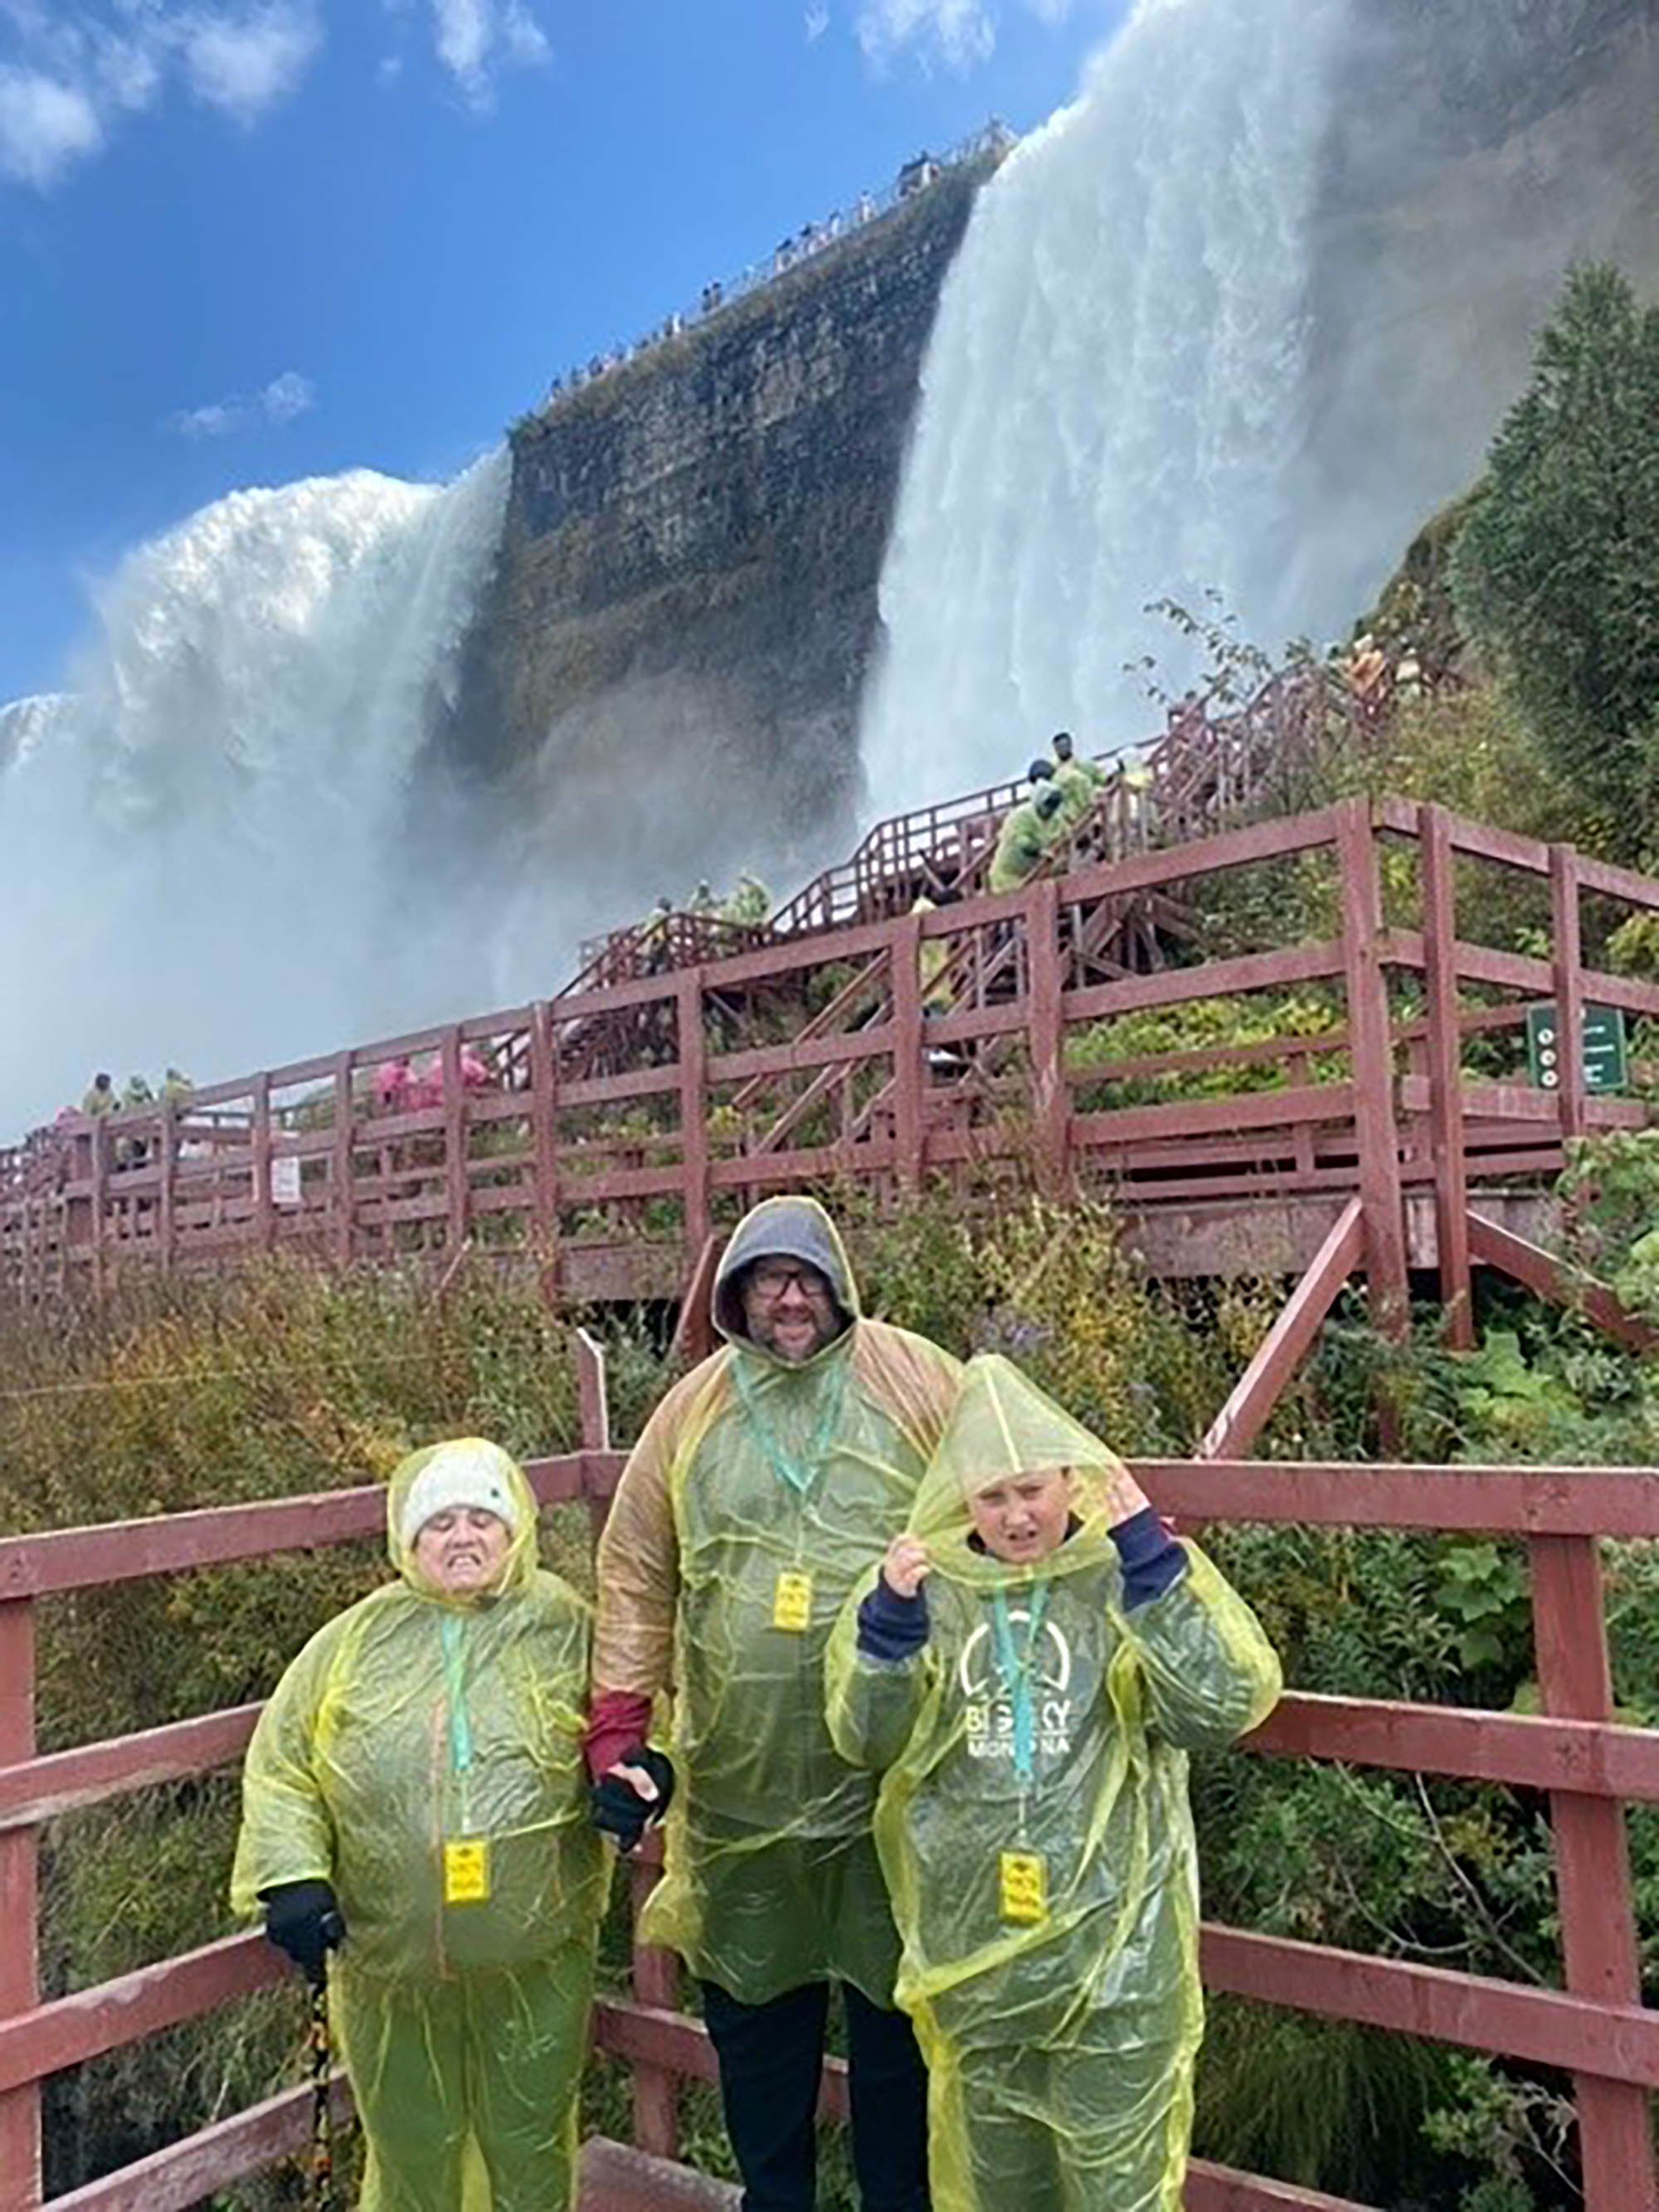 Cathy, far left, visited Niagara Falls with help from the Darren FUNd, which helped with lodgings and a ticket to ride the Maid of the Mist and take the Under Falls Walk.